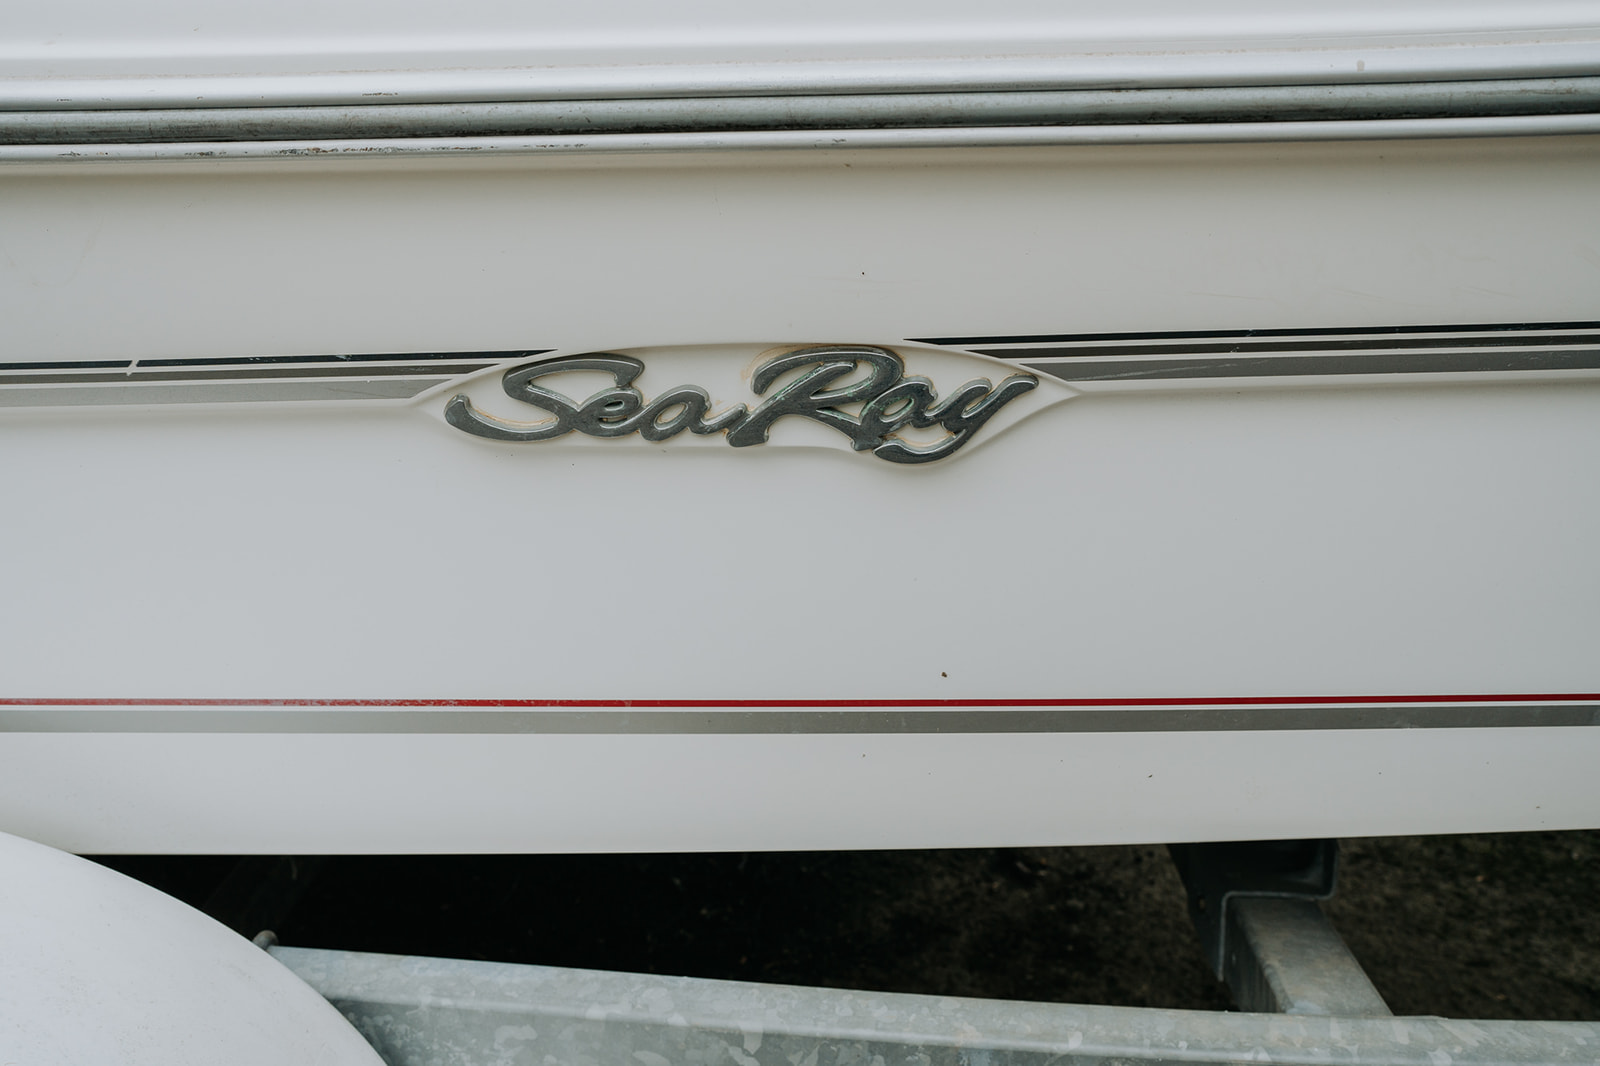 1991 Sea Ray 170 Bowrider Power boat for sale in Asheville, NC - image 1 